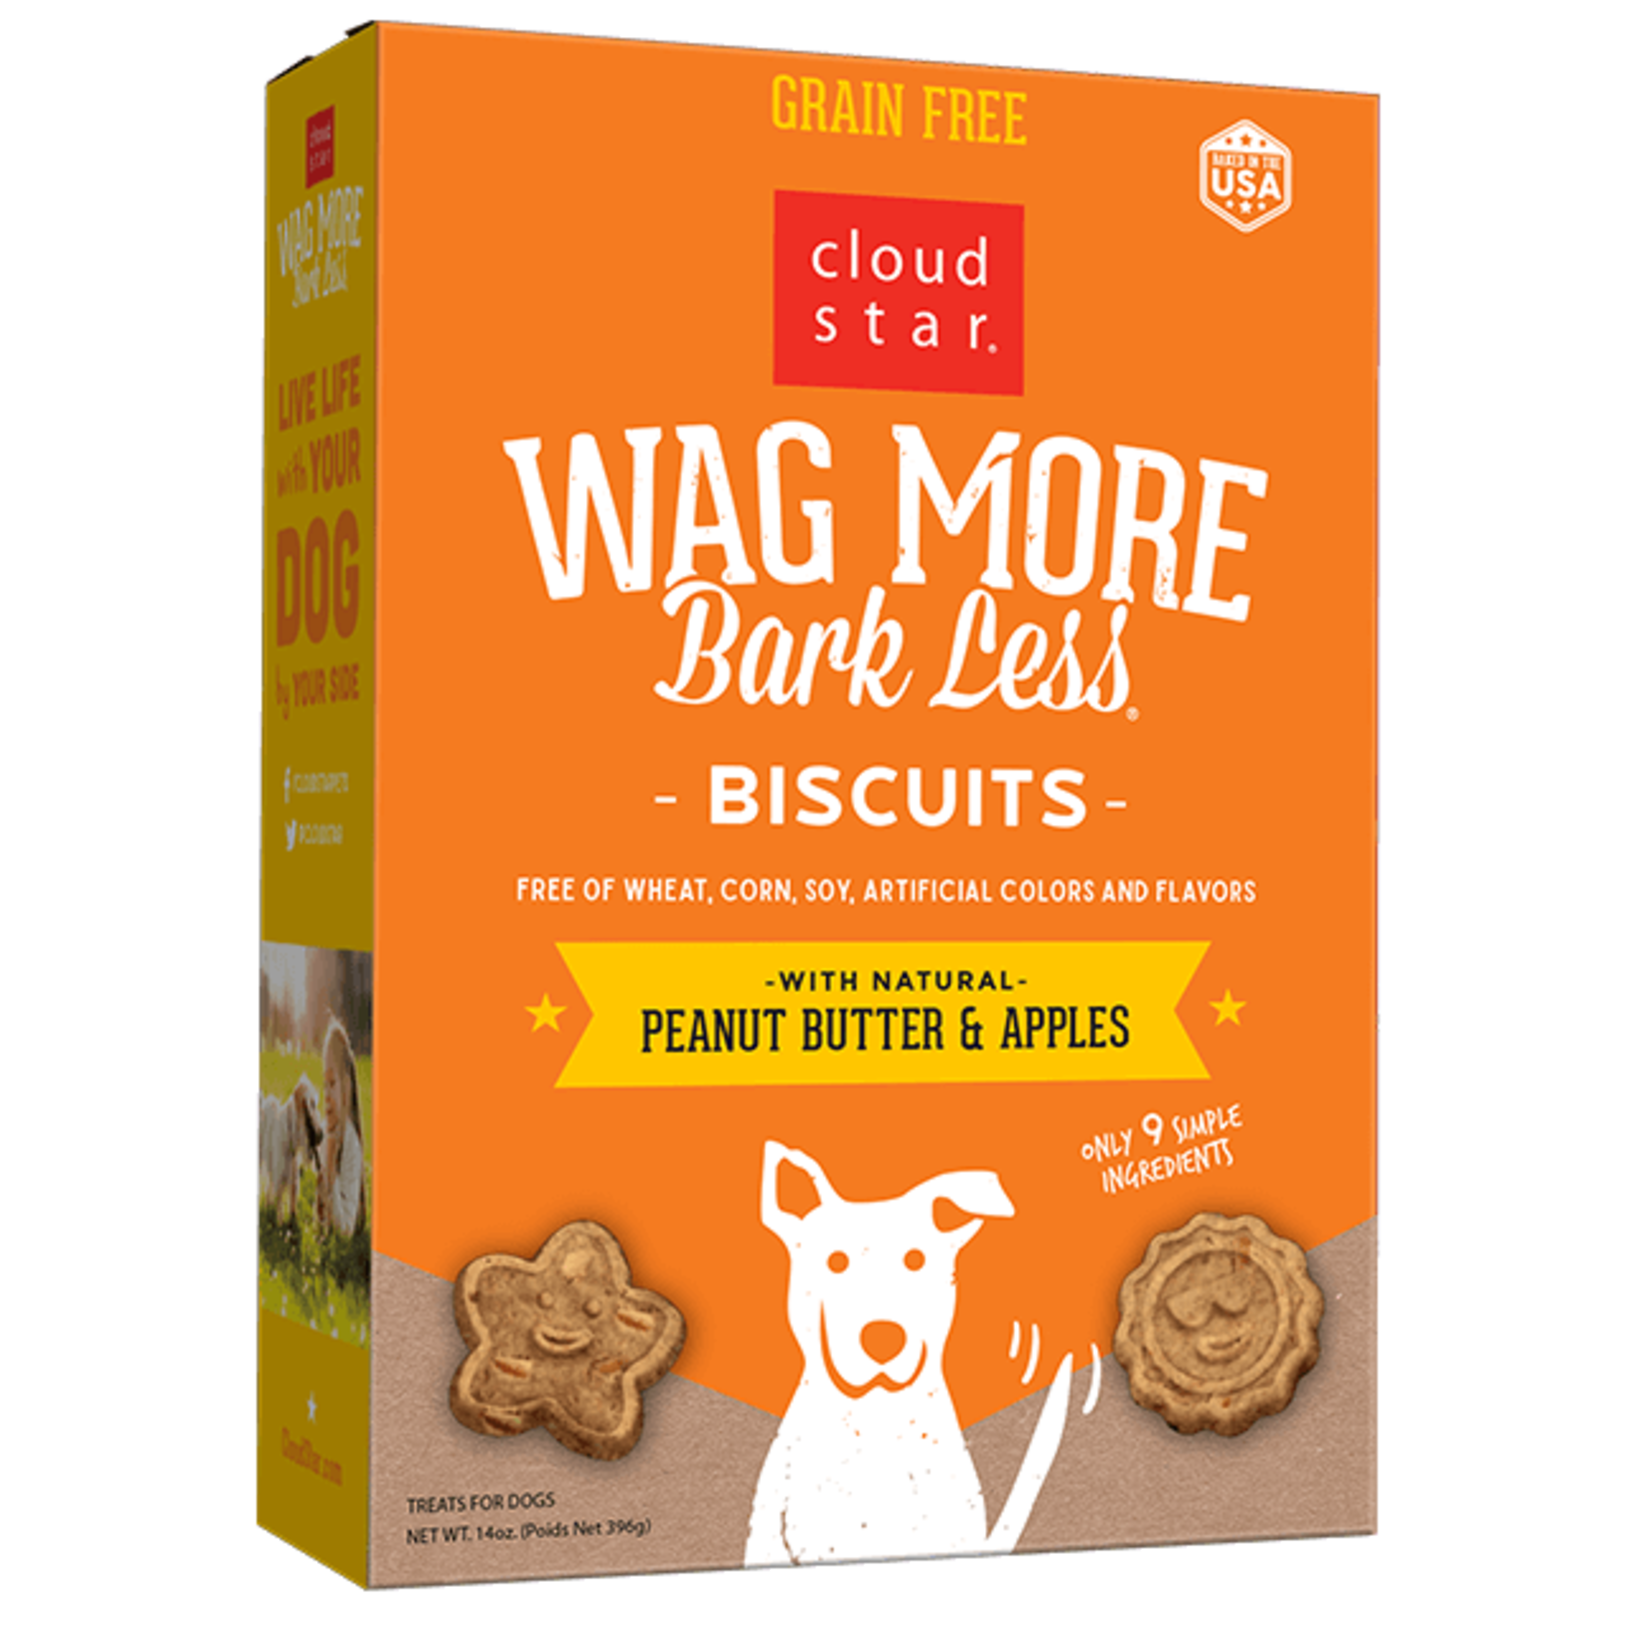 Cloud Star Wag More Bark Less Grain Free Oven Baked Dog Biscuits with Peanut Butter & Apples 14oz